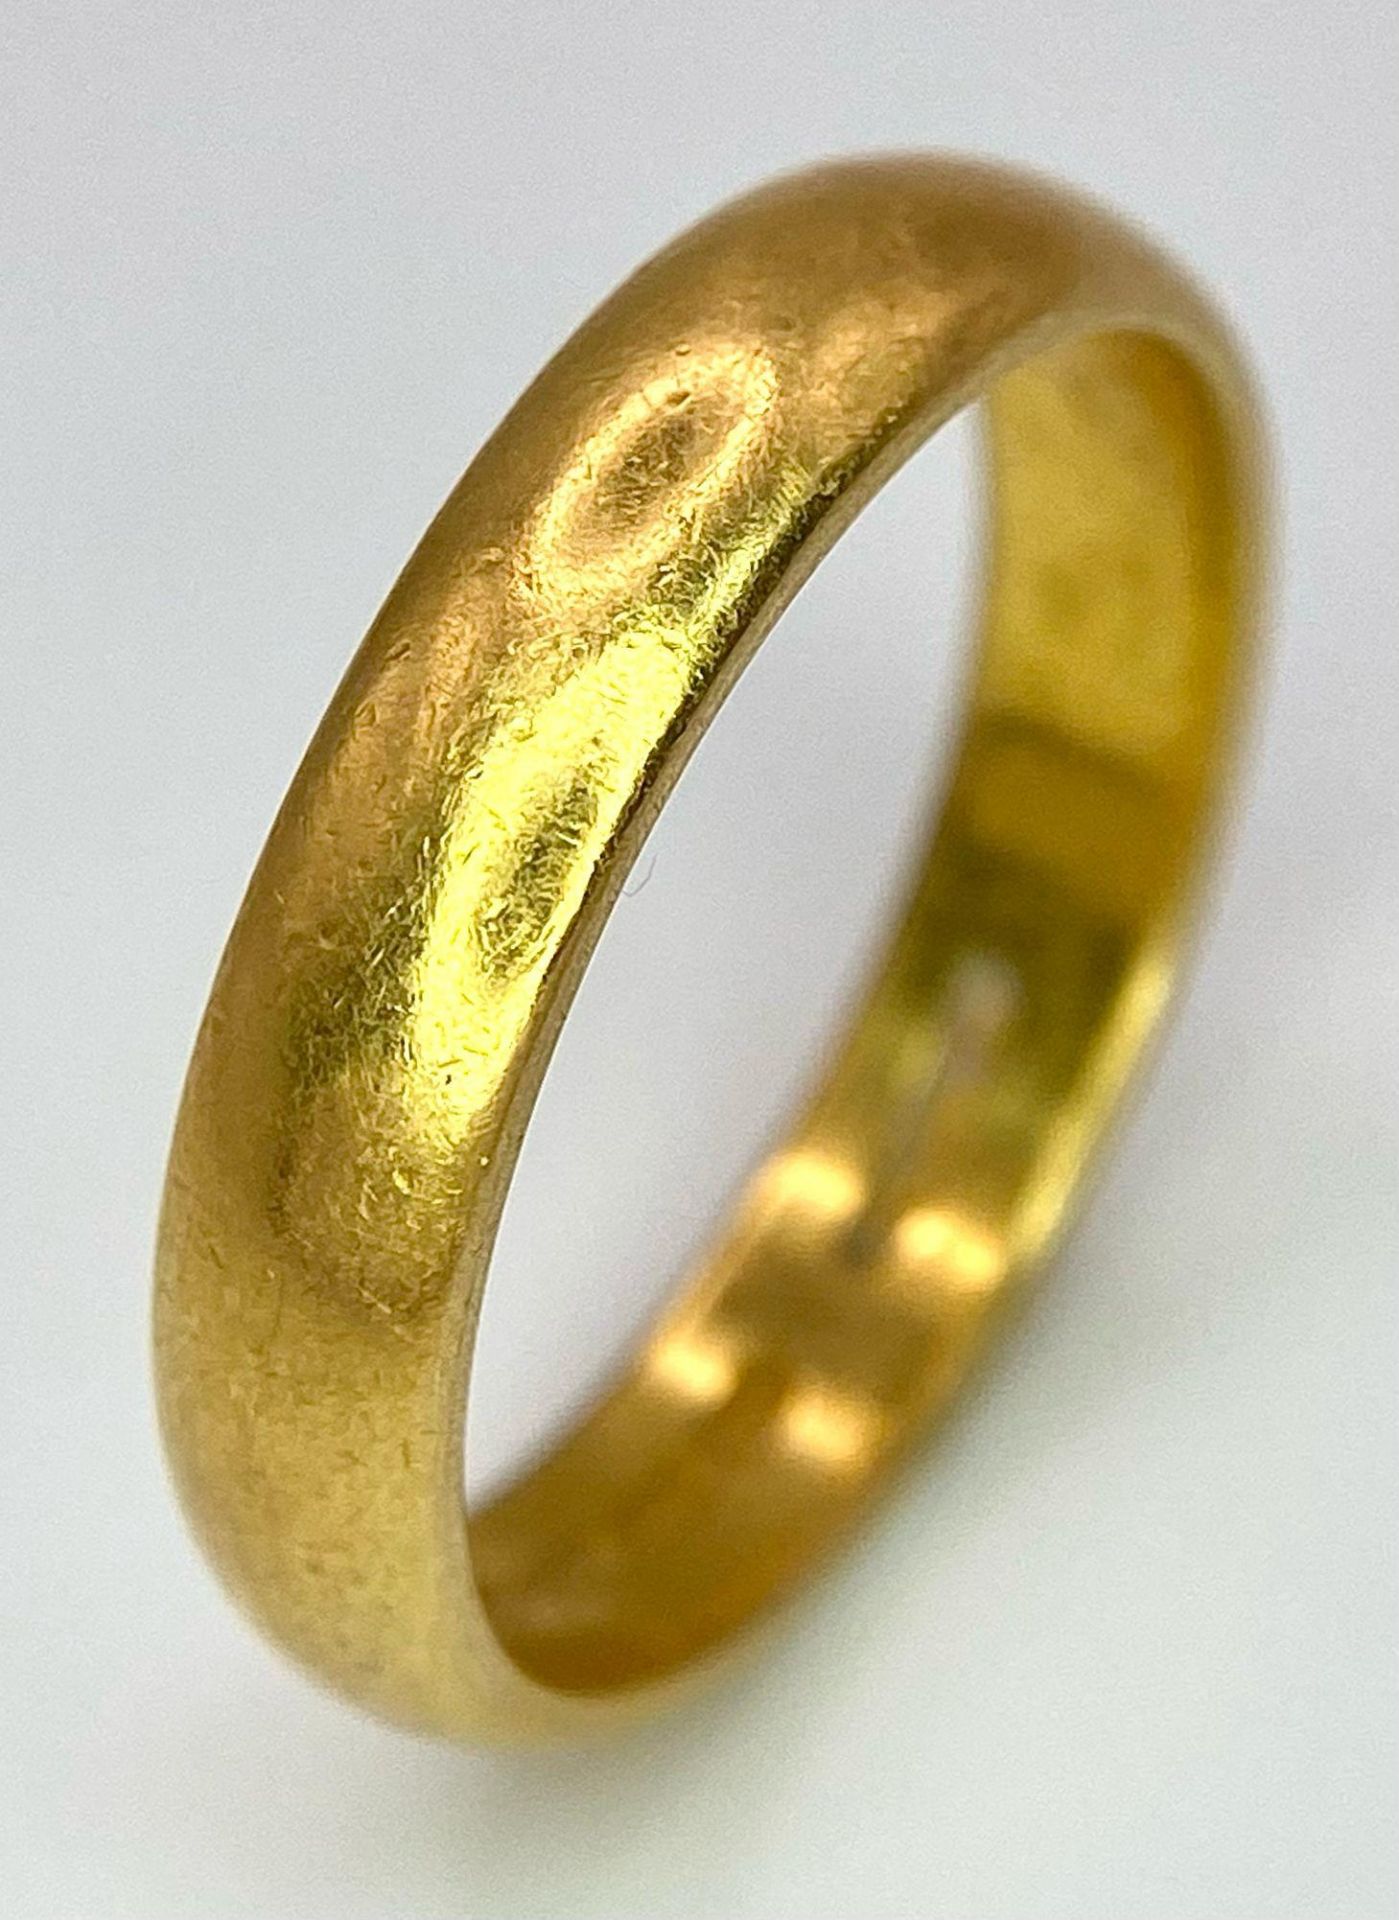 A Vintage 22K Yellow Gold Band Ring. 4mm width. Size O. 5.32g weight. Full UK hallmarks.